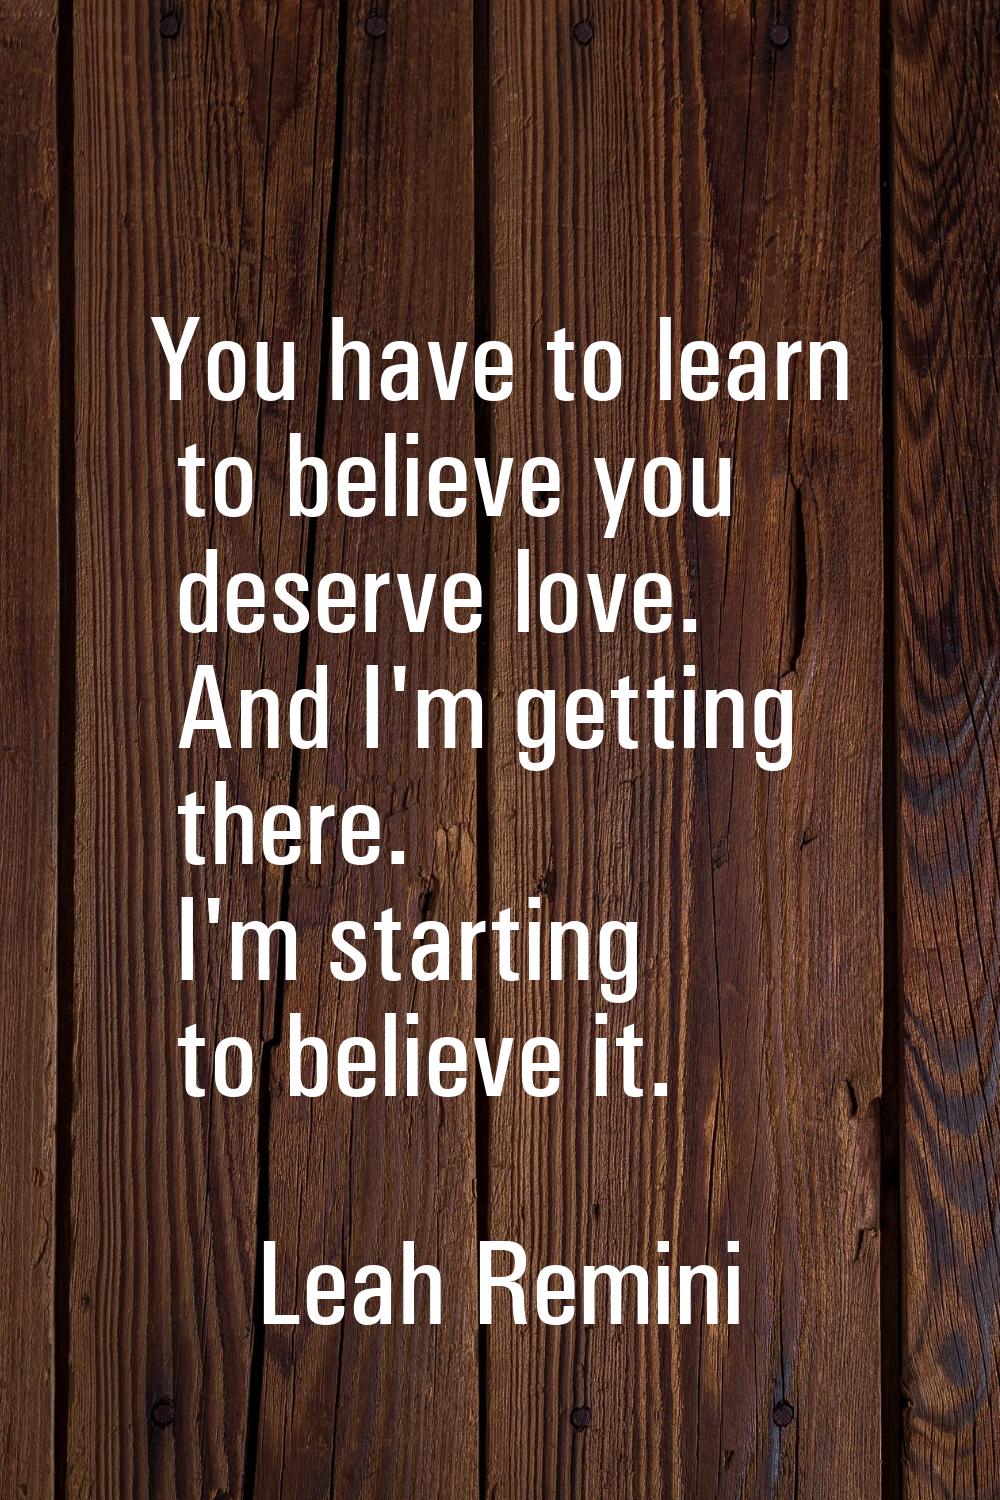 You have to learn to believe you deserve love. And I'm getting there. I'm starting to believe it.